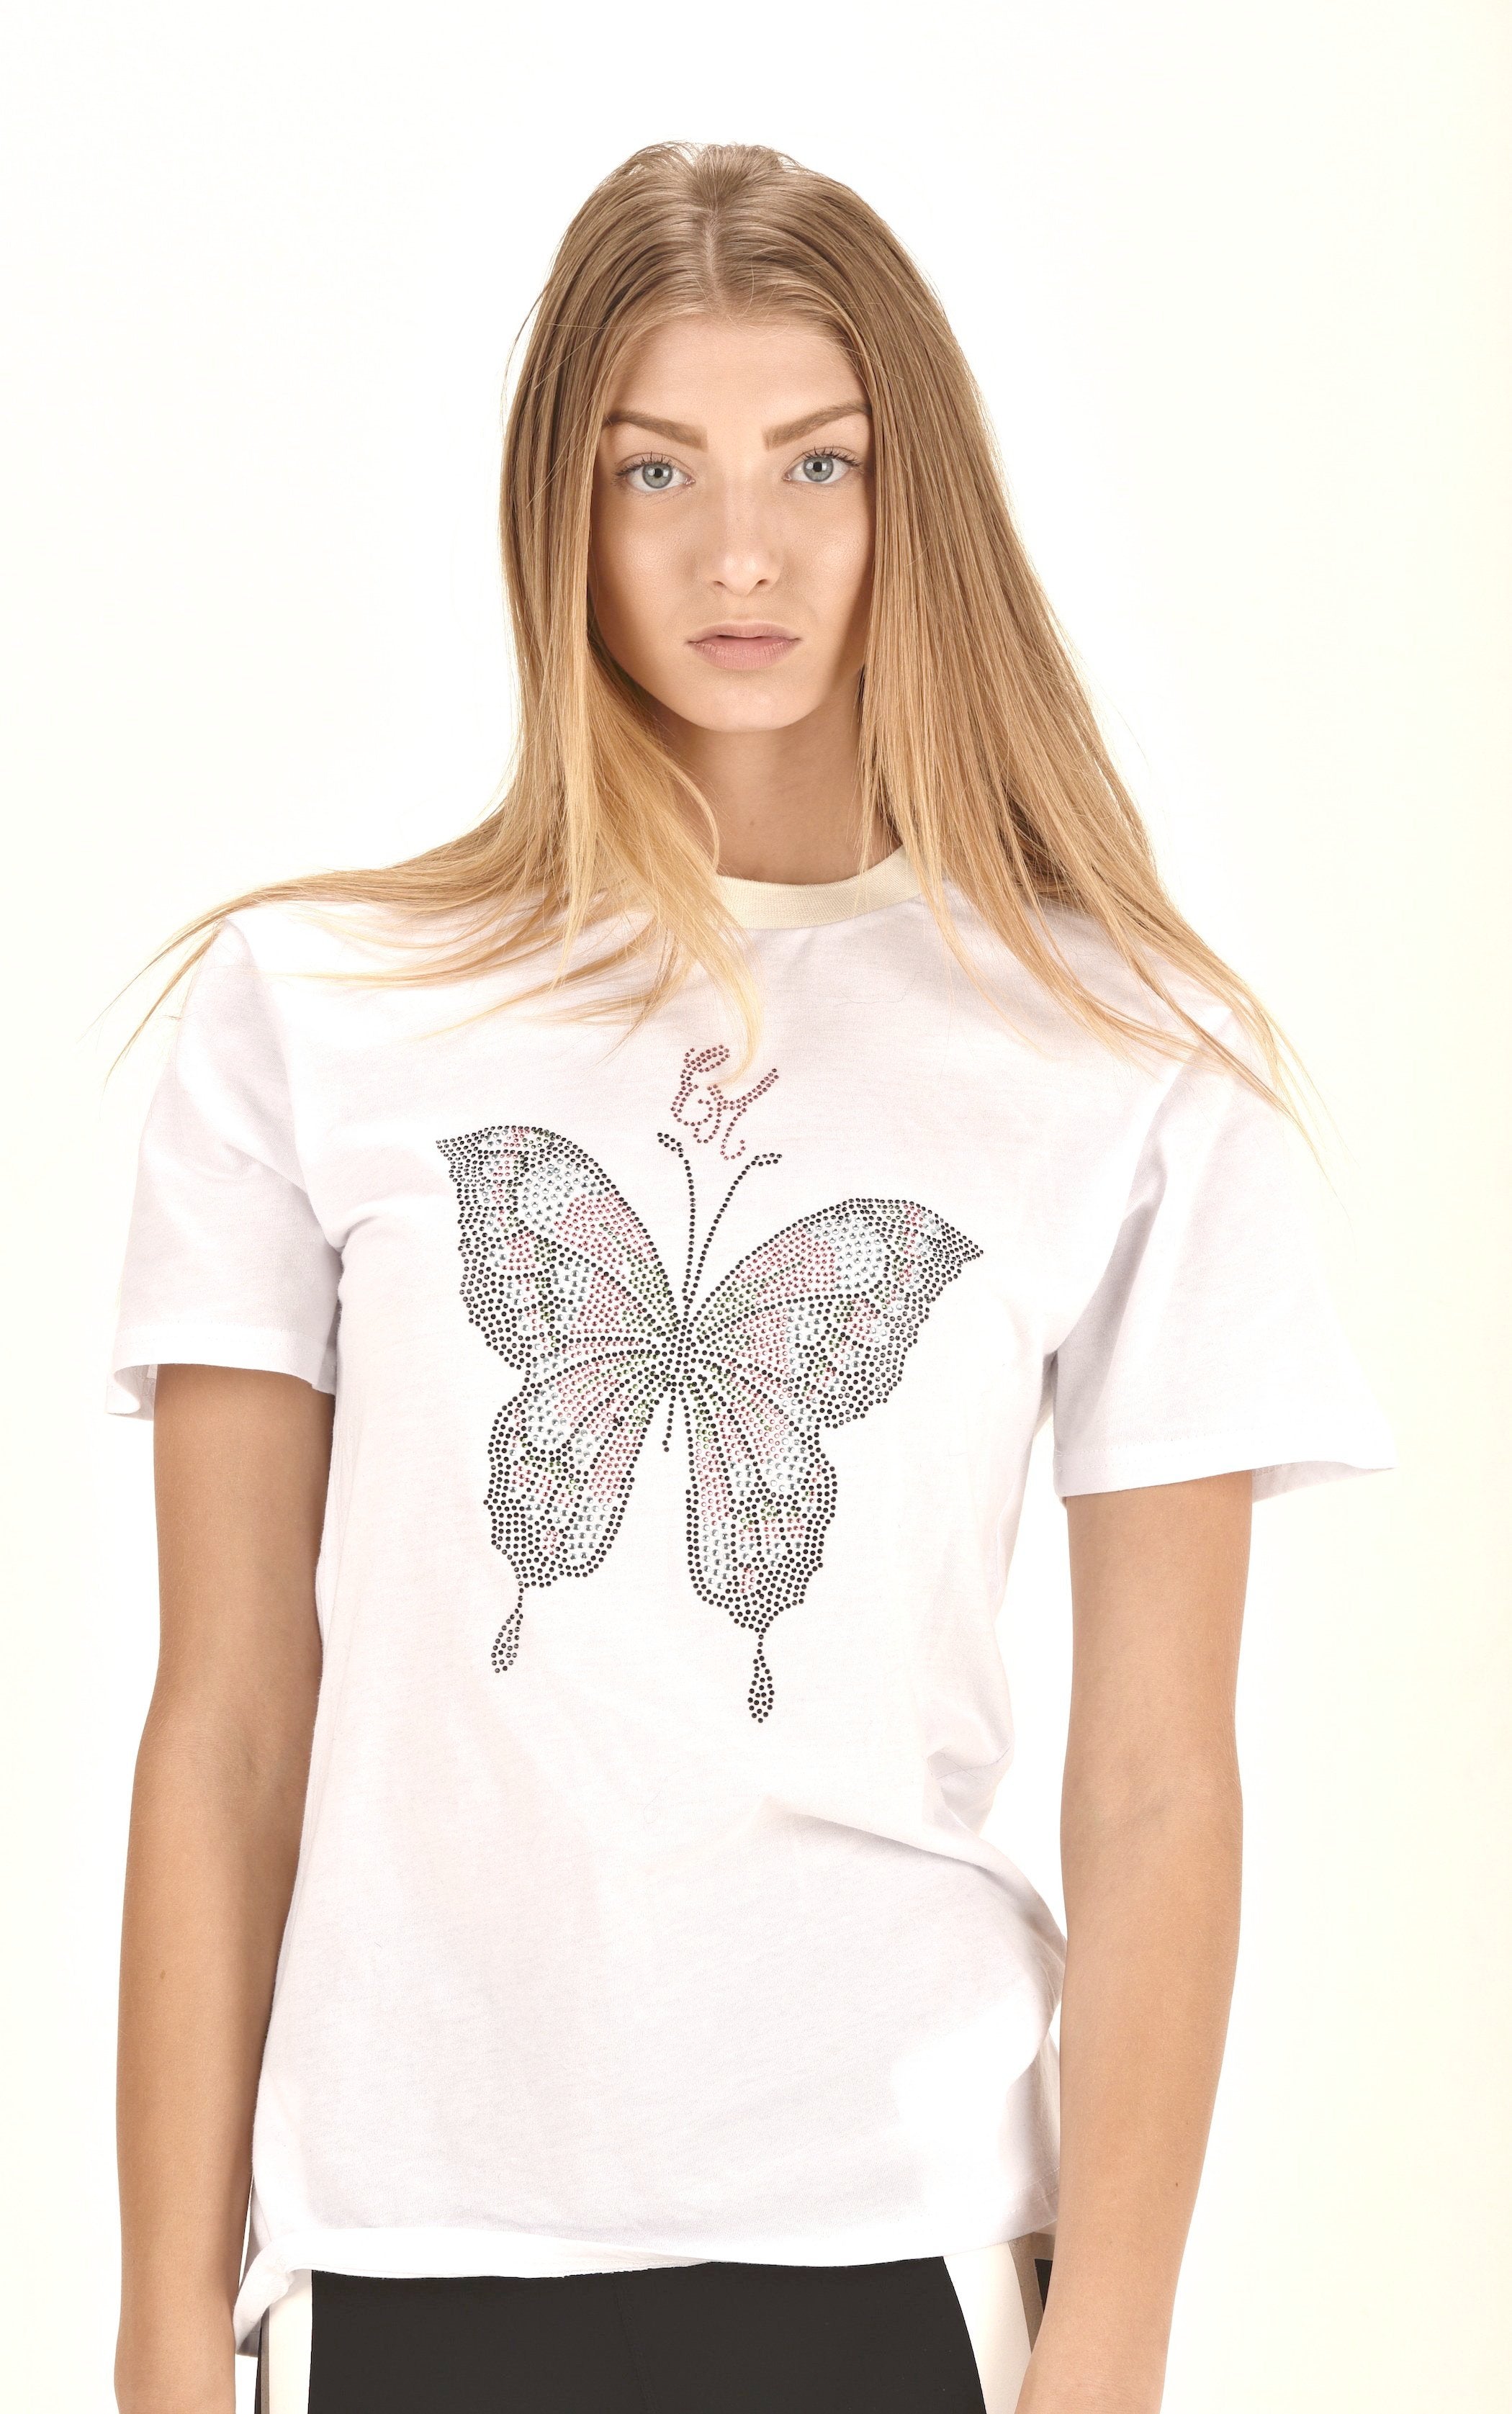 butterfly t shirt t shirts design graphic t shirts t shirt printing unique graphic t shirts  ellie mei design t shirts  logo tee women's black t shirts  gifts idea christmas gifts birthday gifts butterfly festival t shirts  fitted t shirt  white sparkle butterfly t shirts 